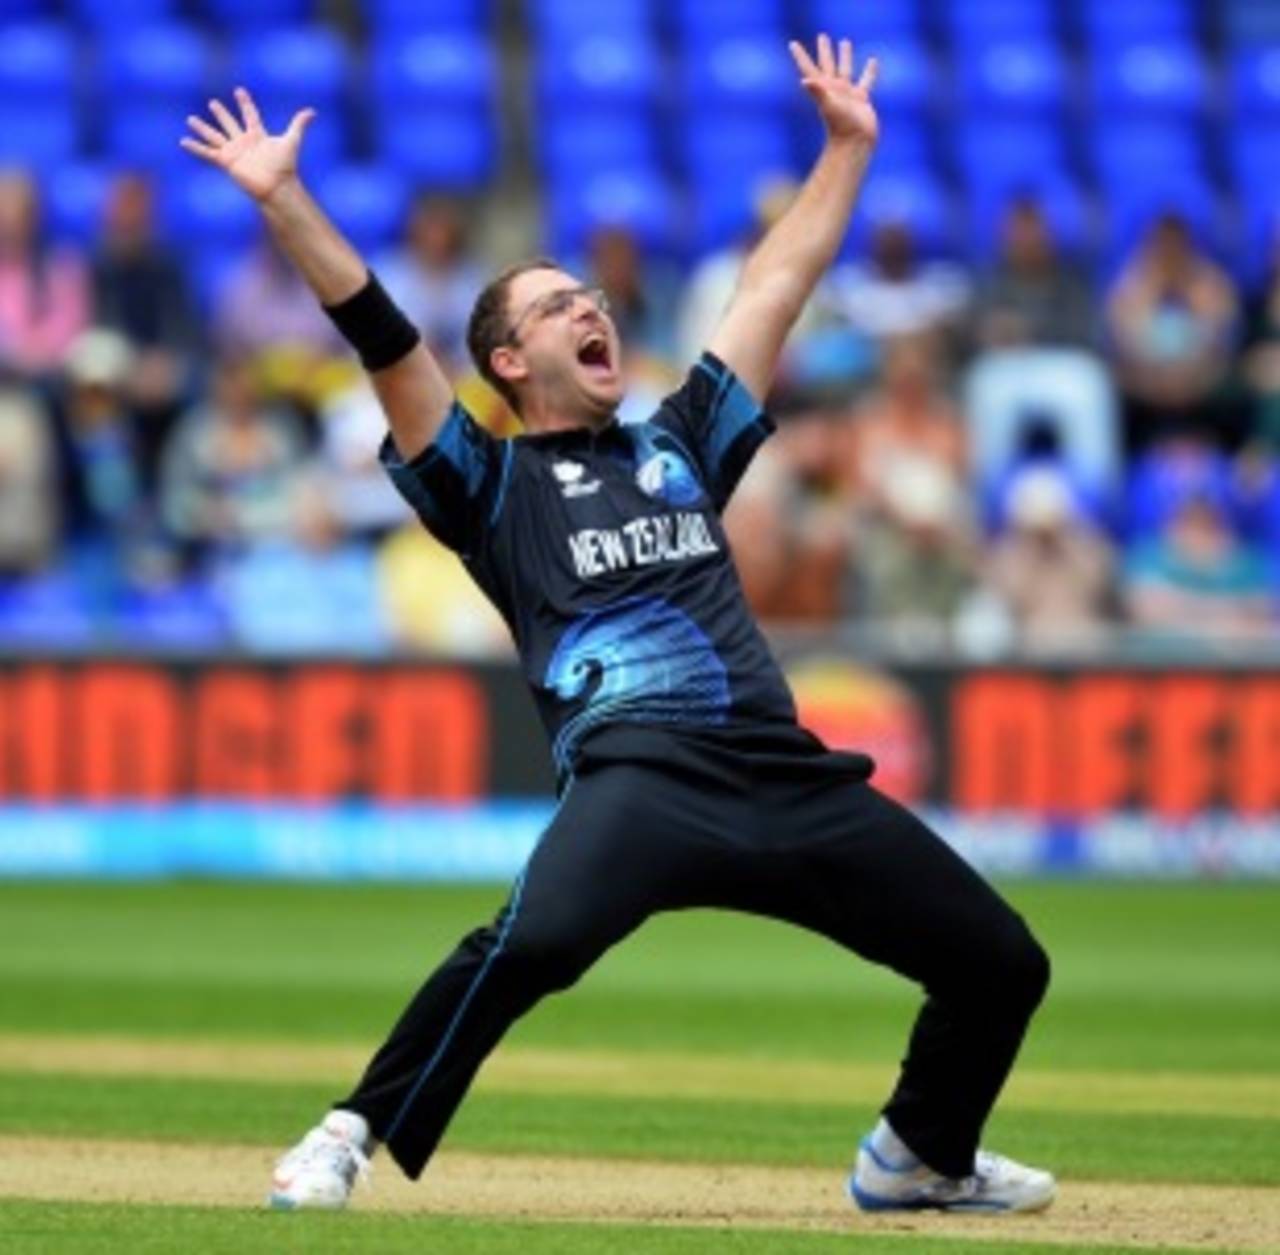 Daniel Vettori struck in his first over on his comeback, New Zealand v Sri Lanka, Champions Trophy, Group A, Cardiff, June 9, 2013